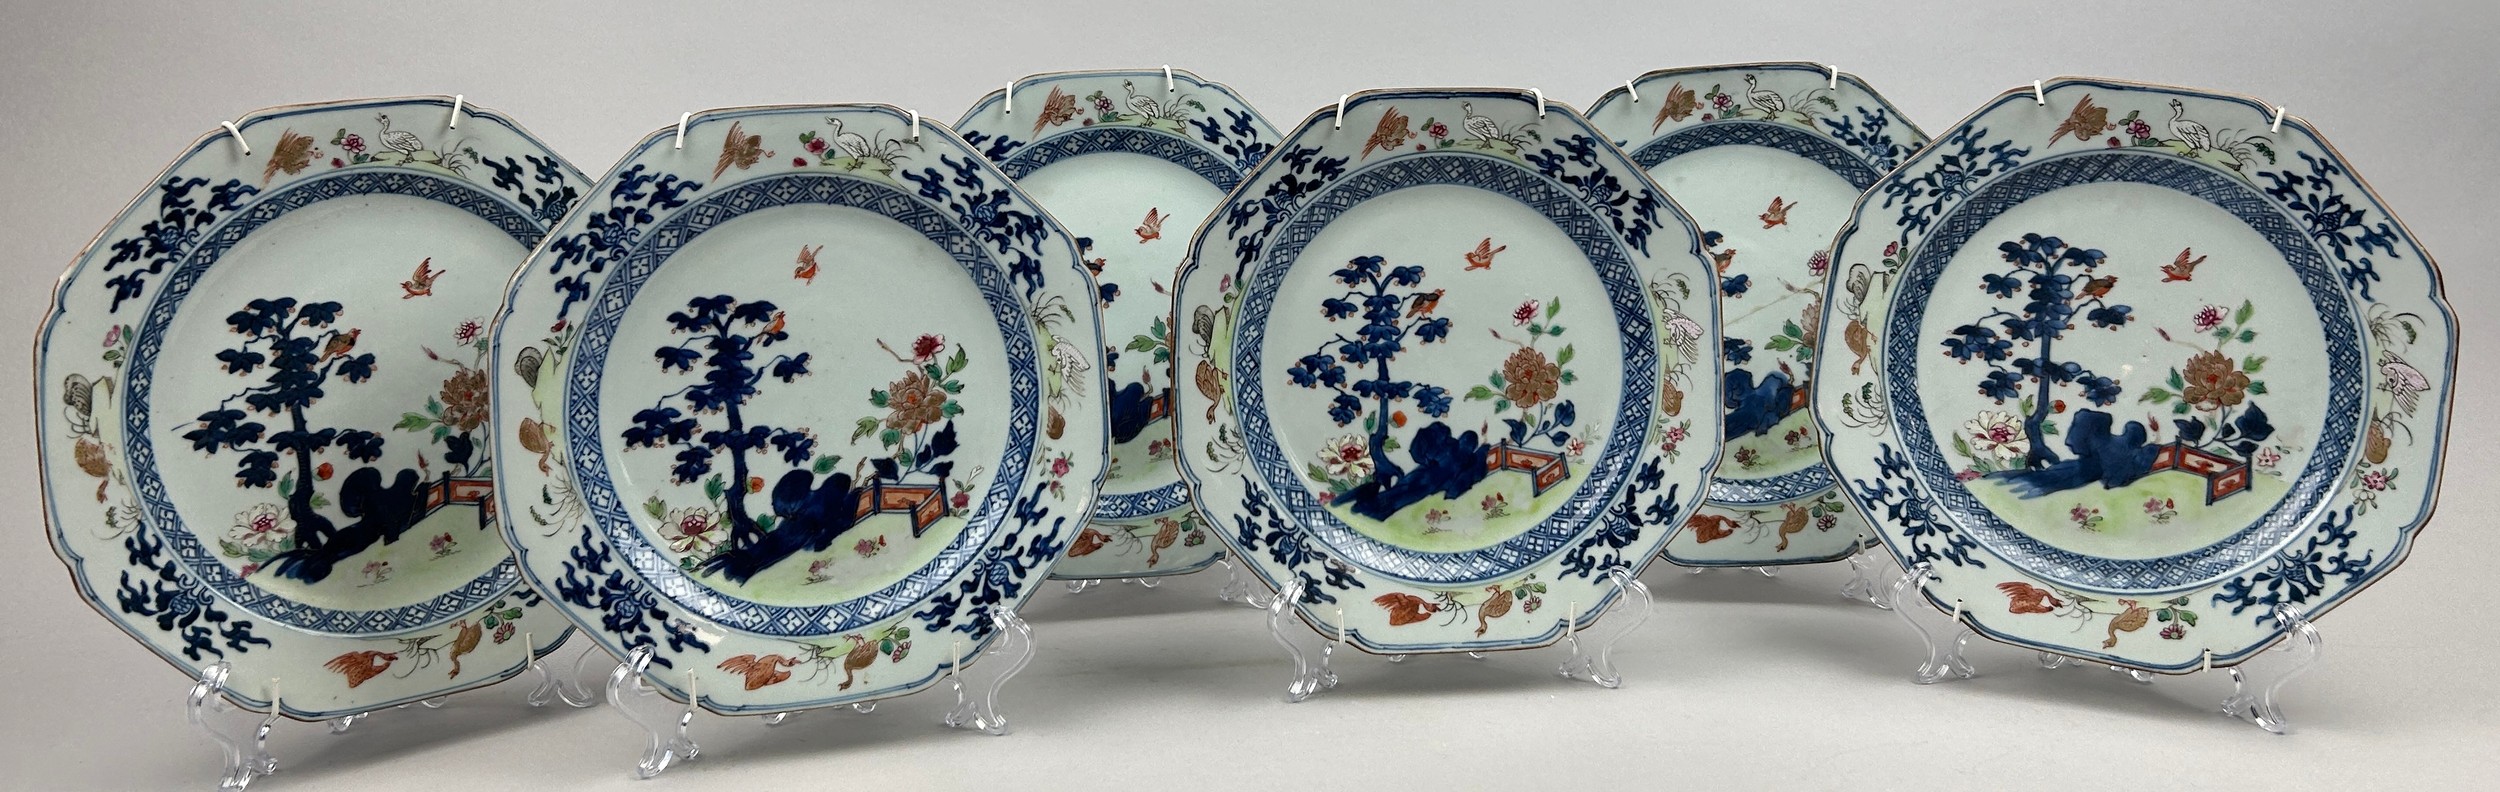 A CHINESE PORCELAIN PART DINNER SERVICE, QIANLONG PERIOD CIRCA 1750, comprising a pair of meat